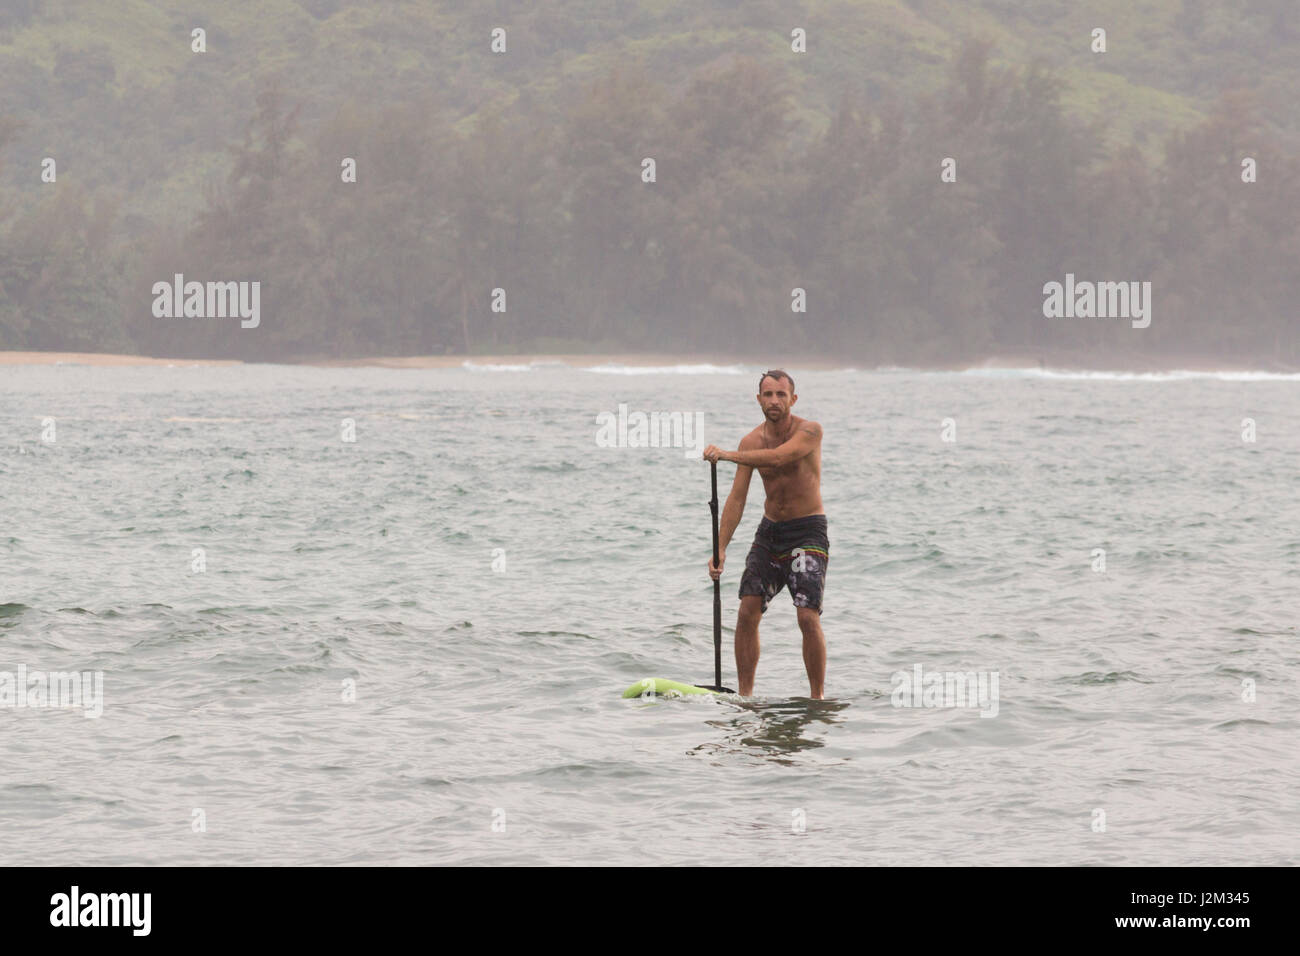 Stand up paddle boarding in Hanalei Bay, Kauai Stock Photo